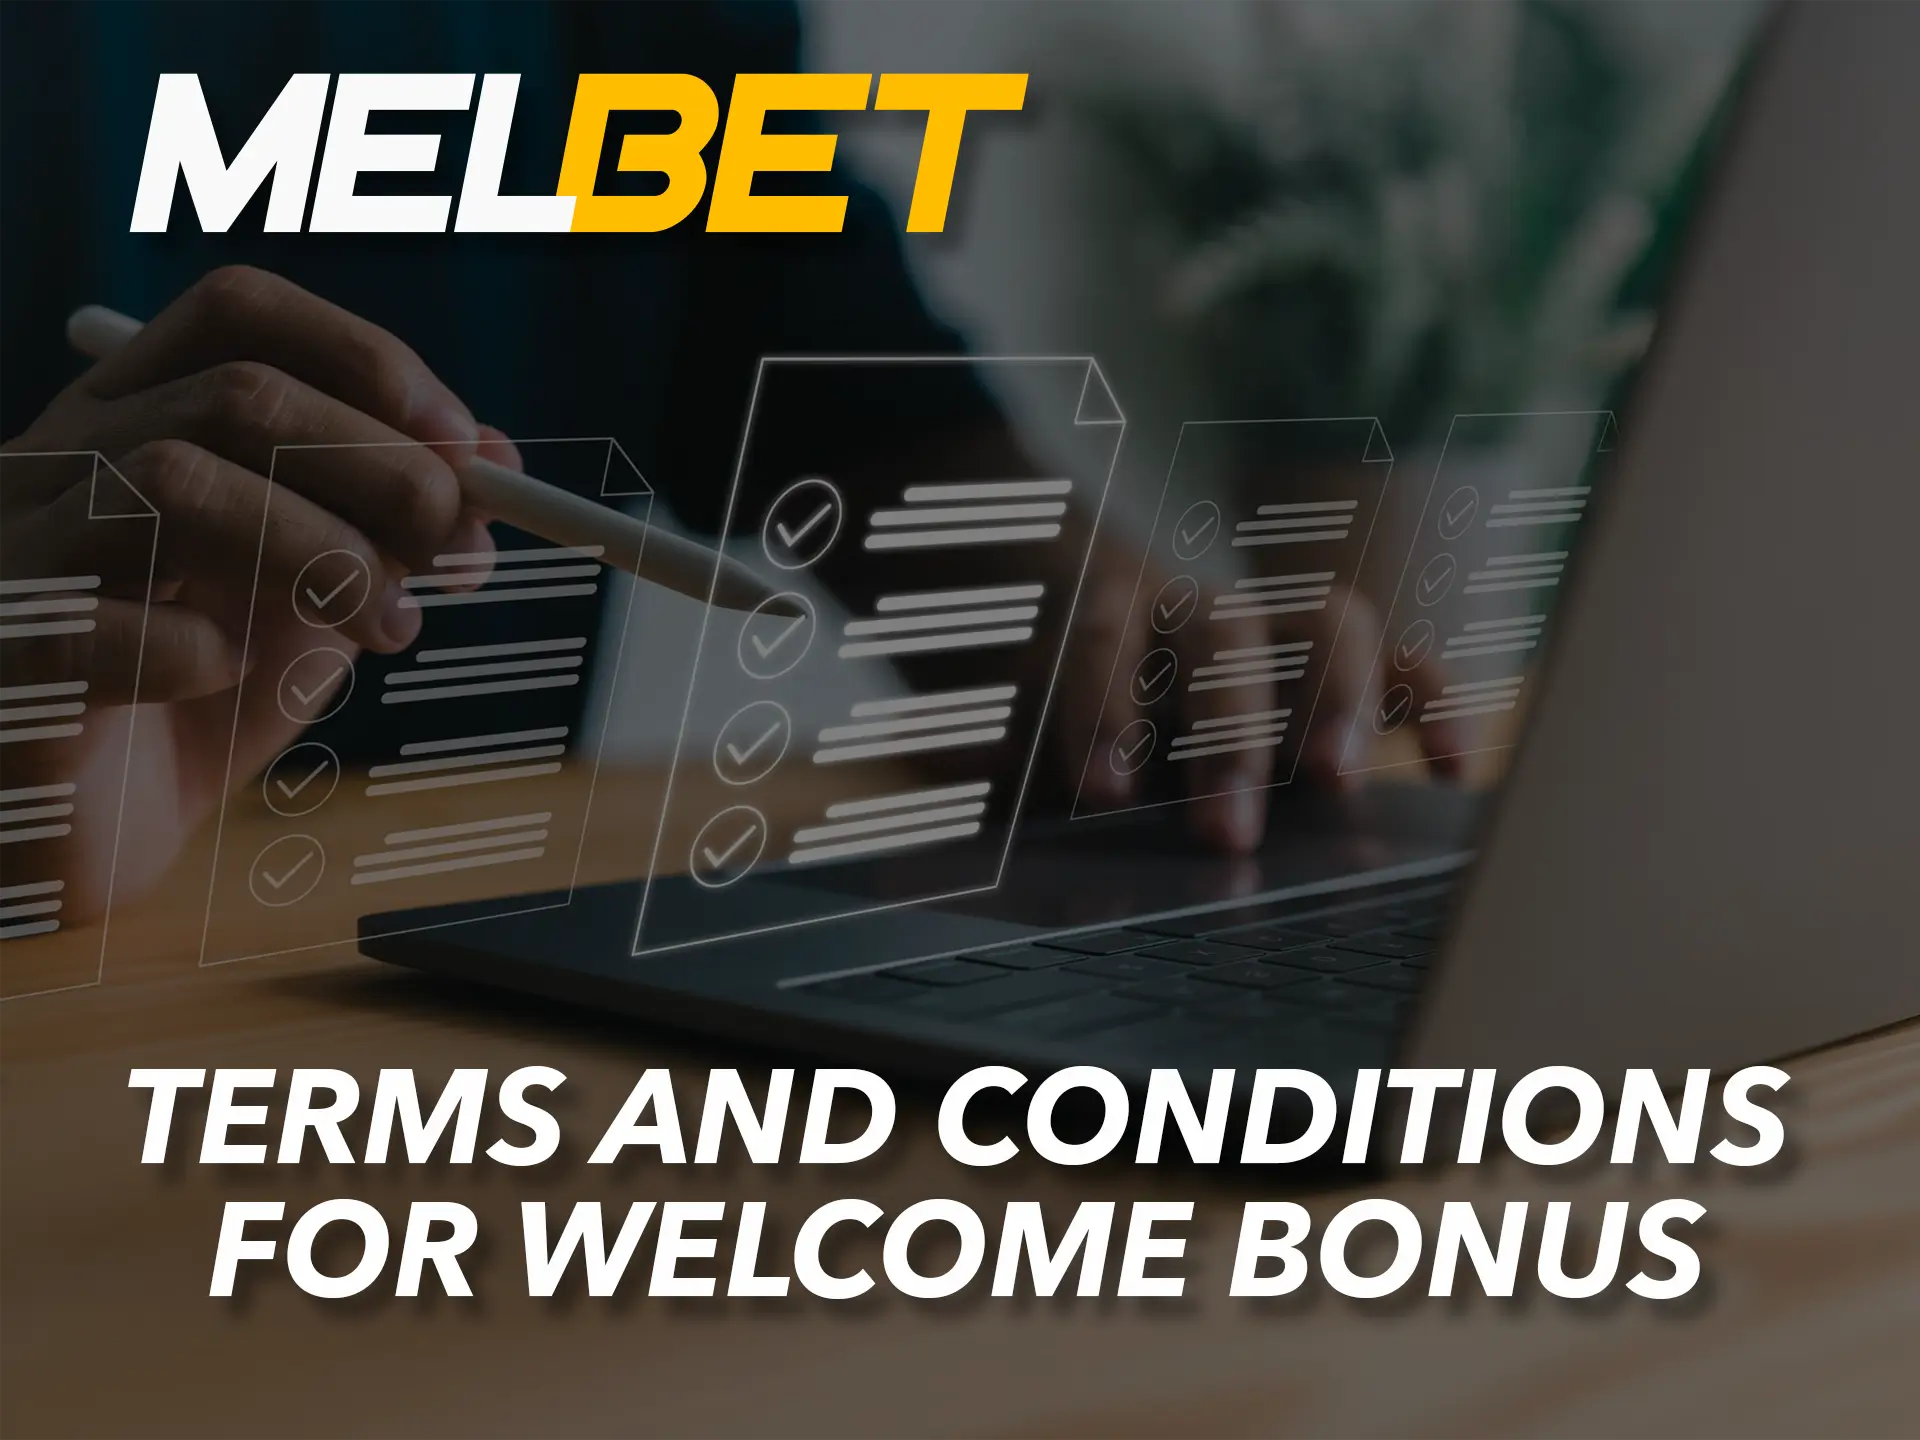 Don't forget about the wagering terms of the bonus at Melbet Casino.